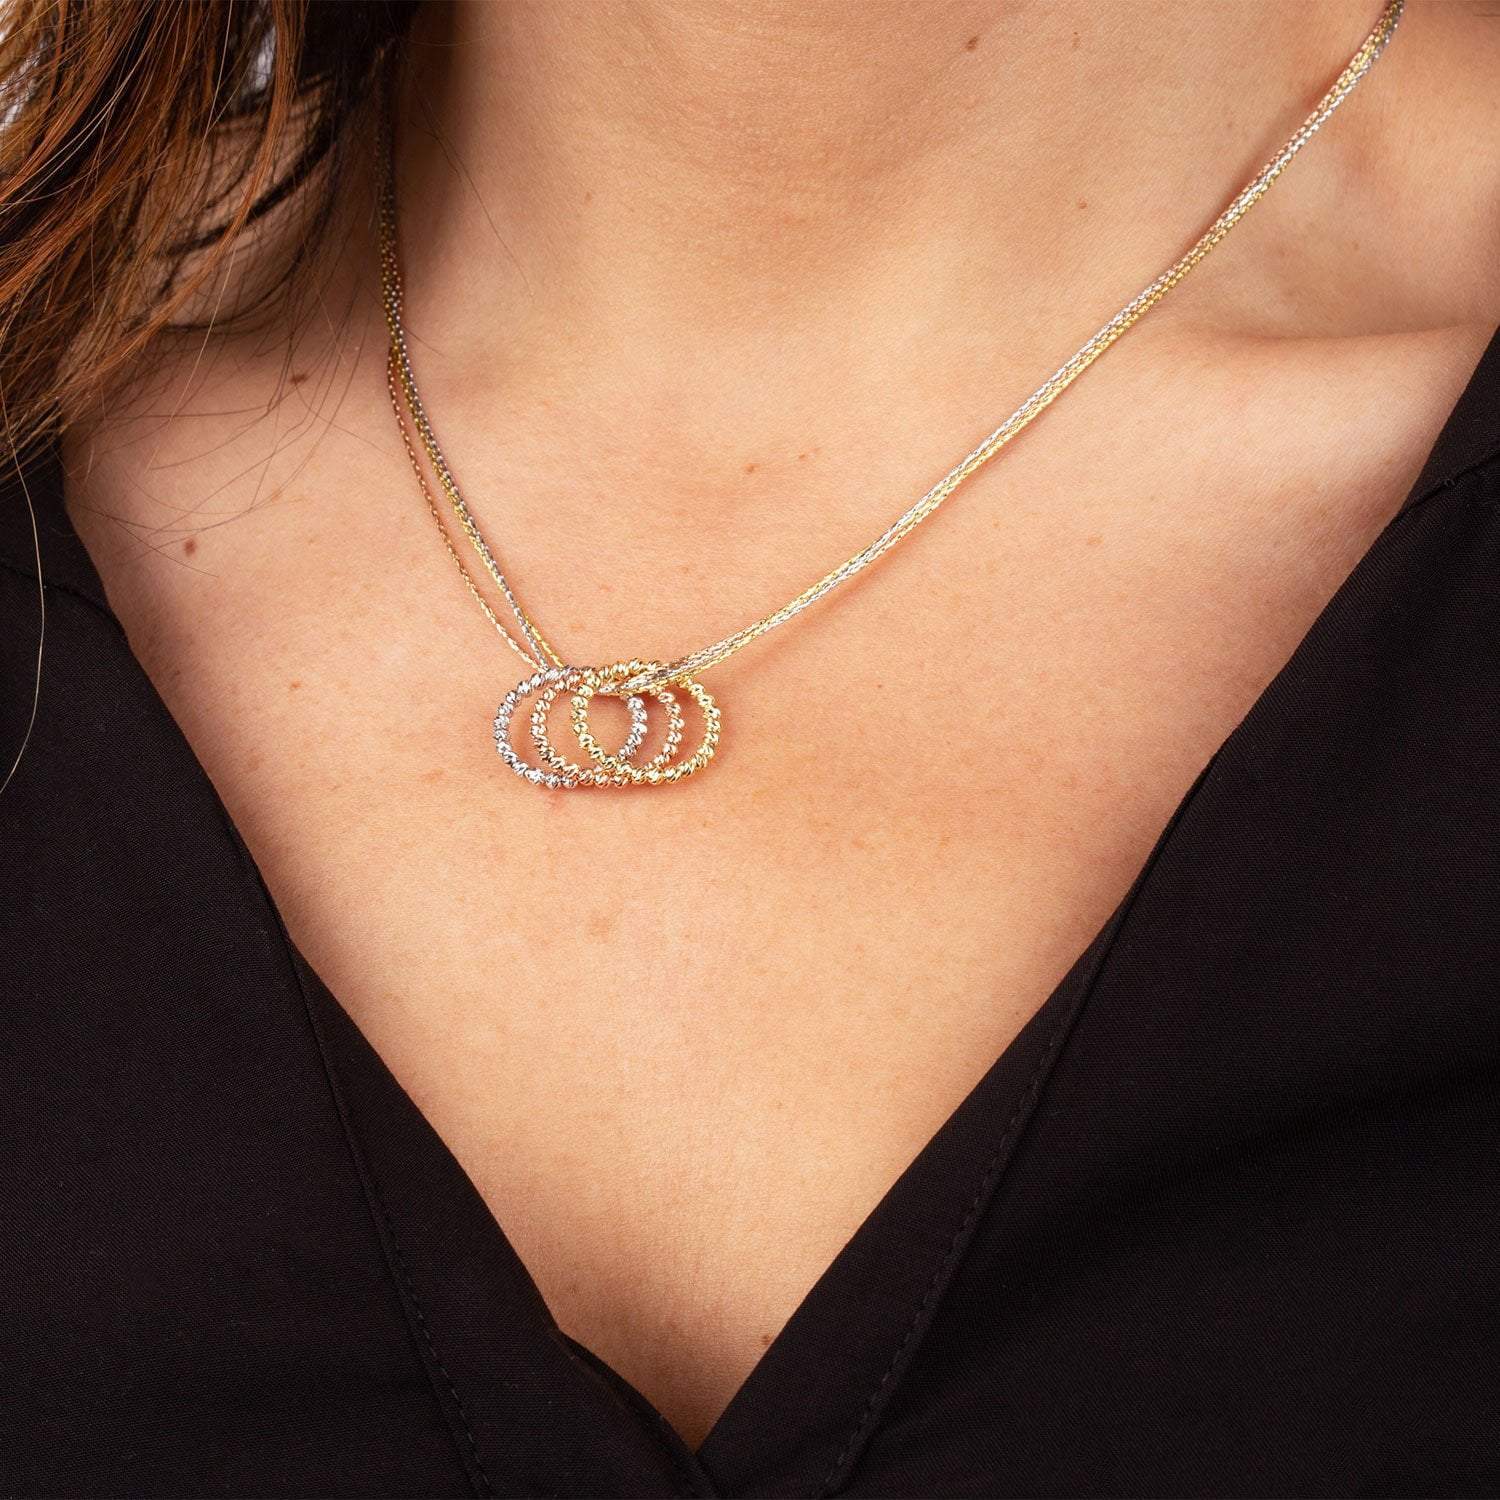 Rose Gold Radiance 3-Ring Necklace with Brilliant CZ Accents in Gold, Rhodium and Rose Gold Tri-Color Eros Milano Roma Designer Jewelry